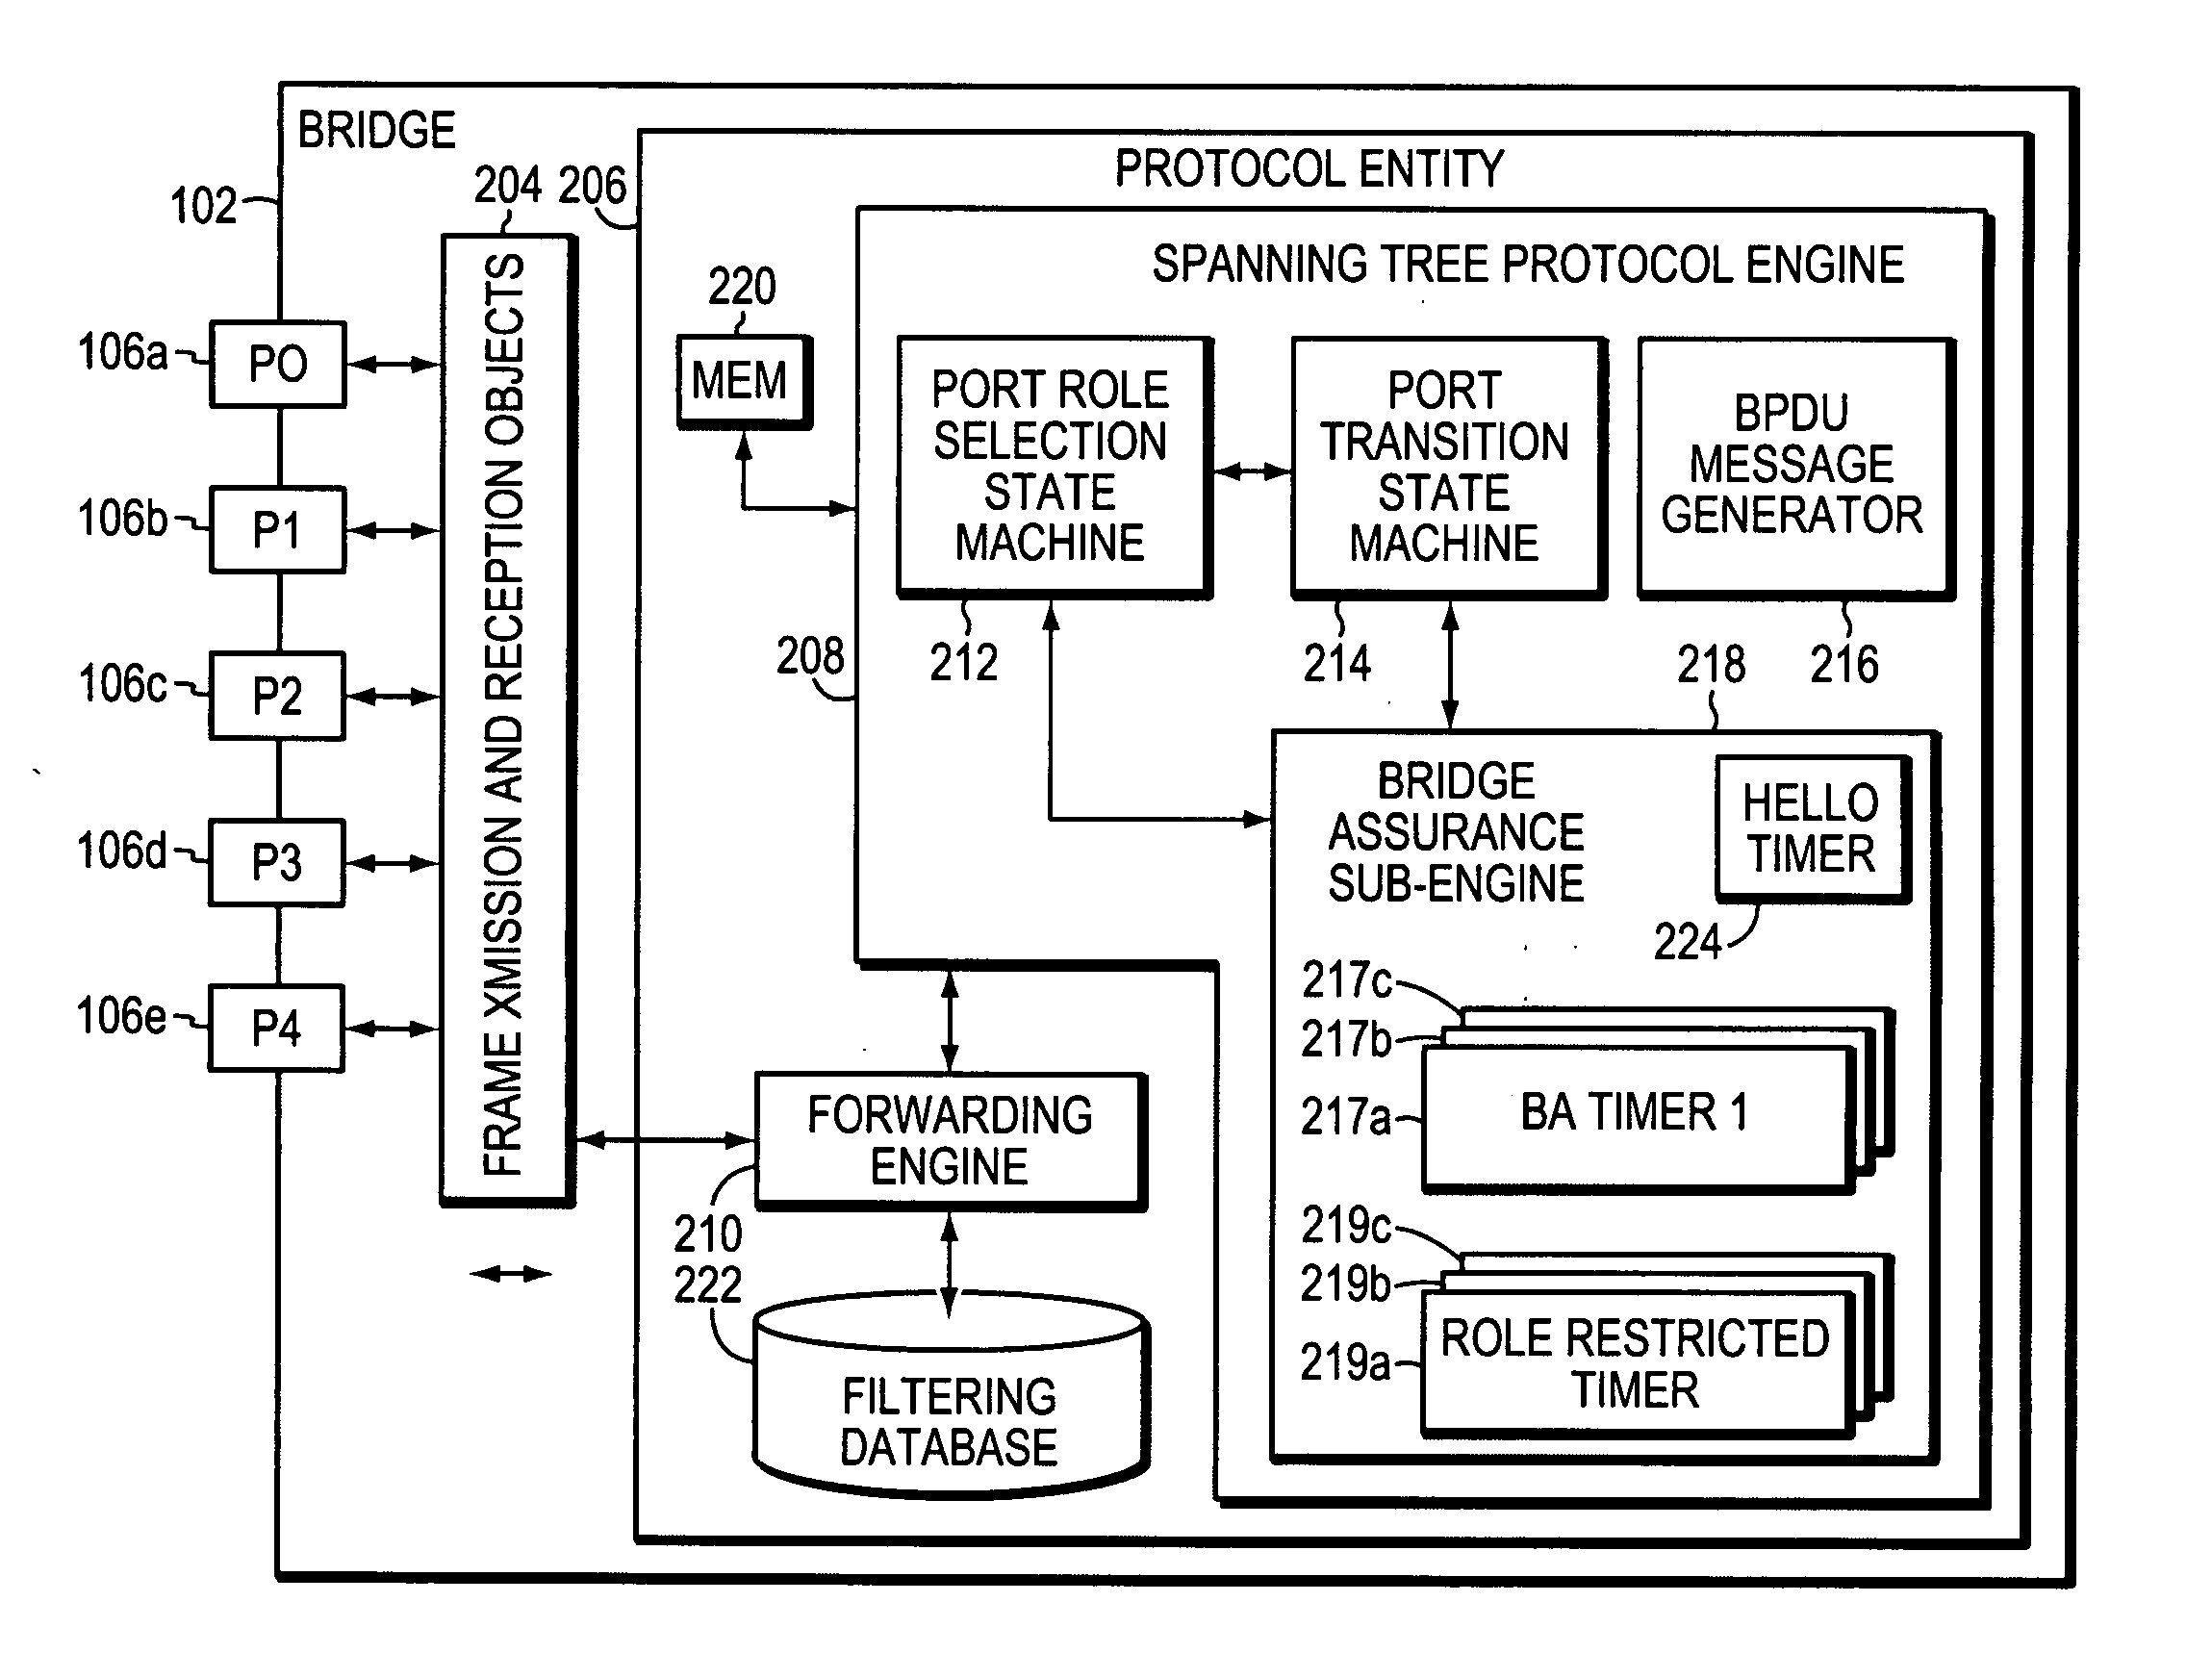 System and method for assuring the operation of network devices in bridged networks